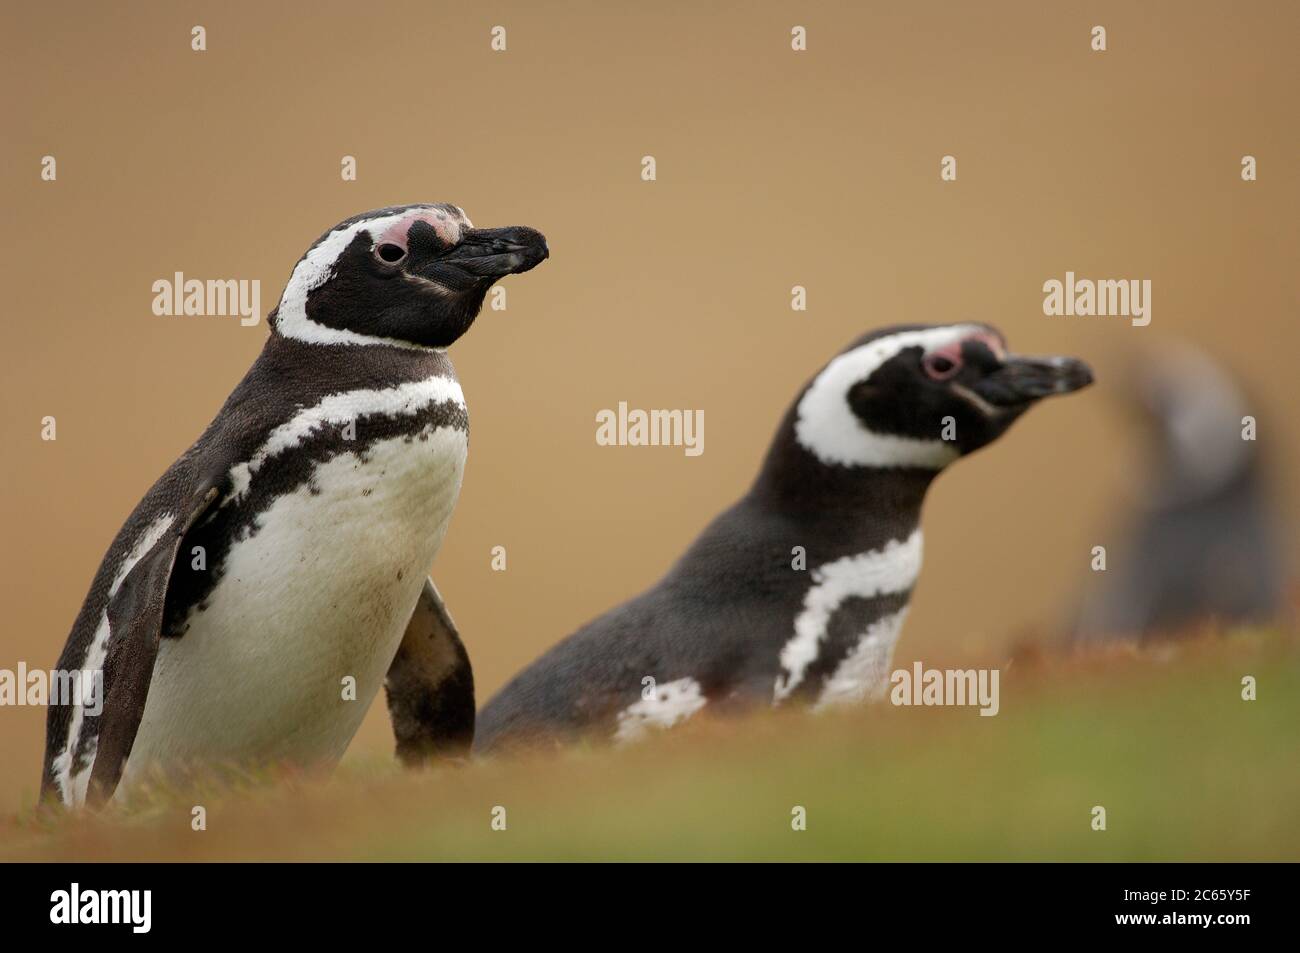 With a body size of ca. 73 cm the Magellanic penguin (Spheniscus magellanicus) belongs to the medium sized penguin species. The two black pectoral bands are characteristic and help to distinguish it from the very similar Humboldt penguin, which has only one such band. Stock Photo